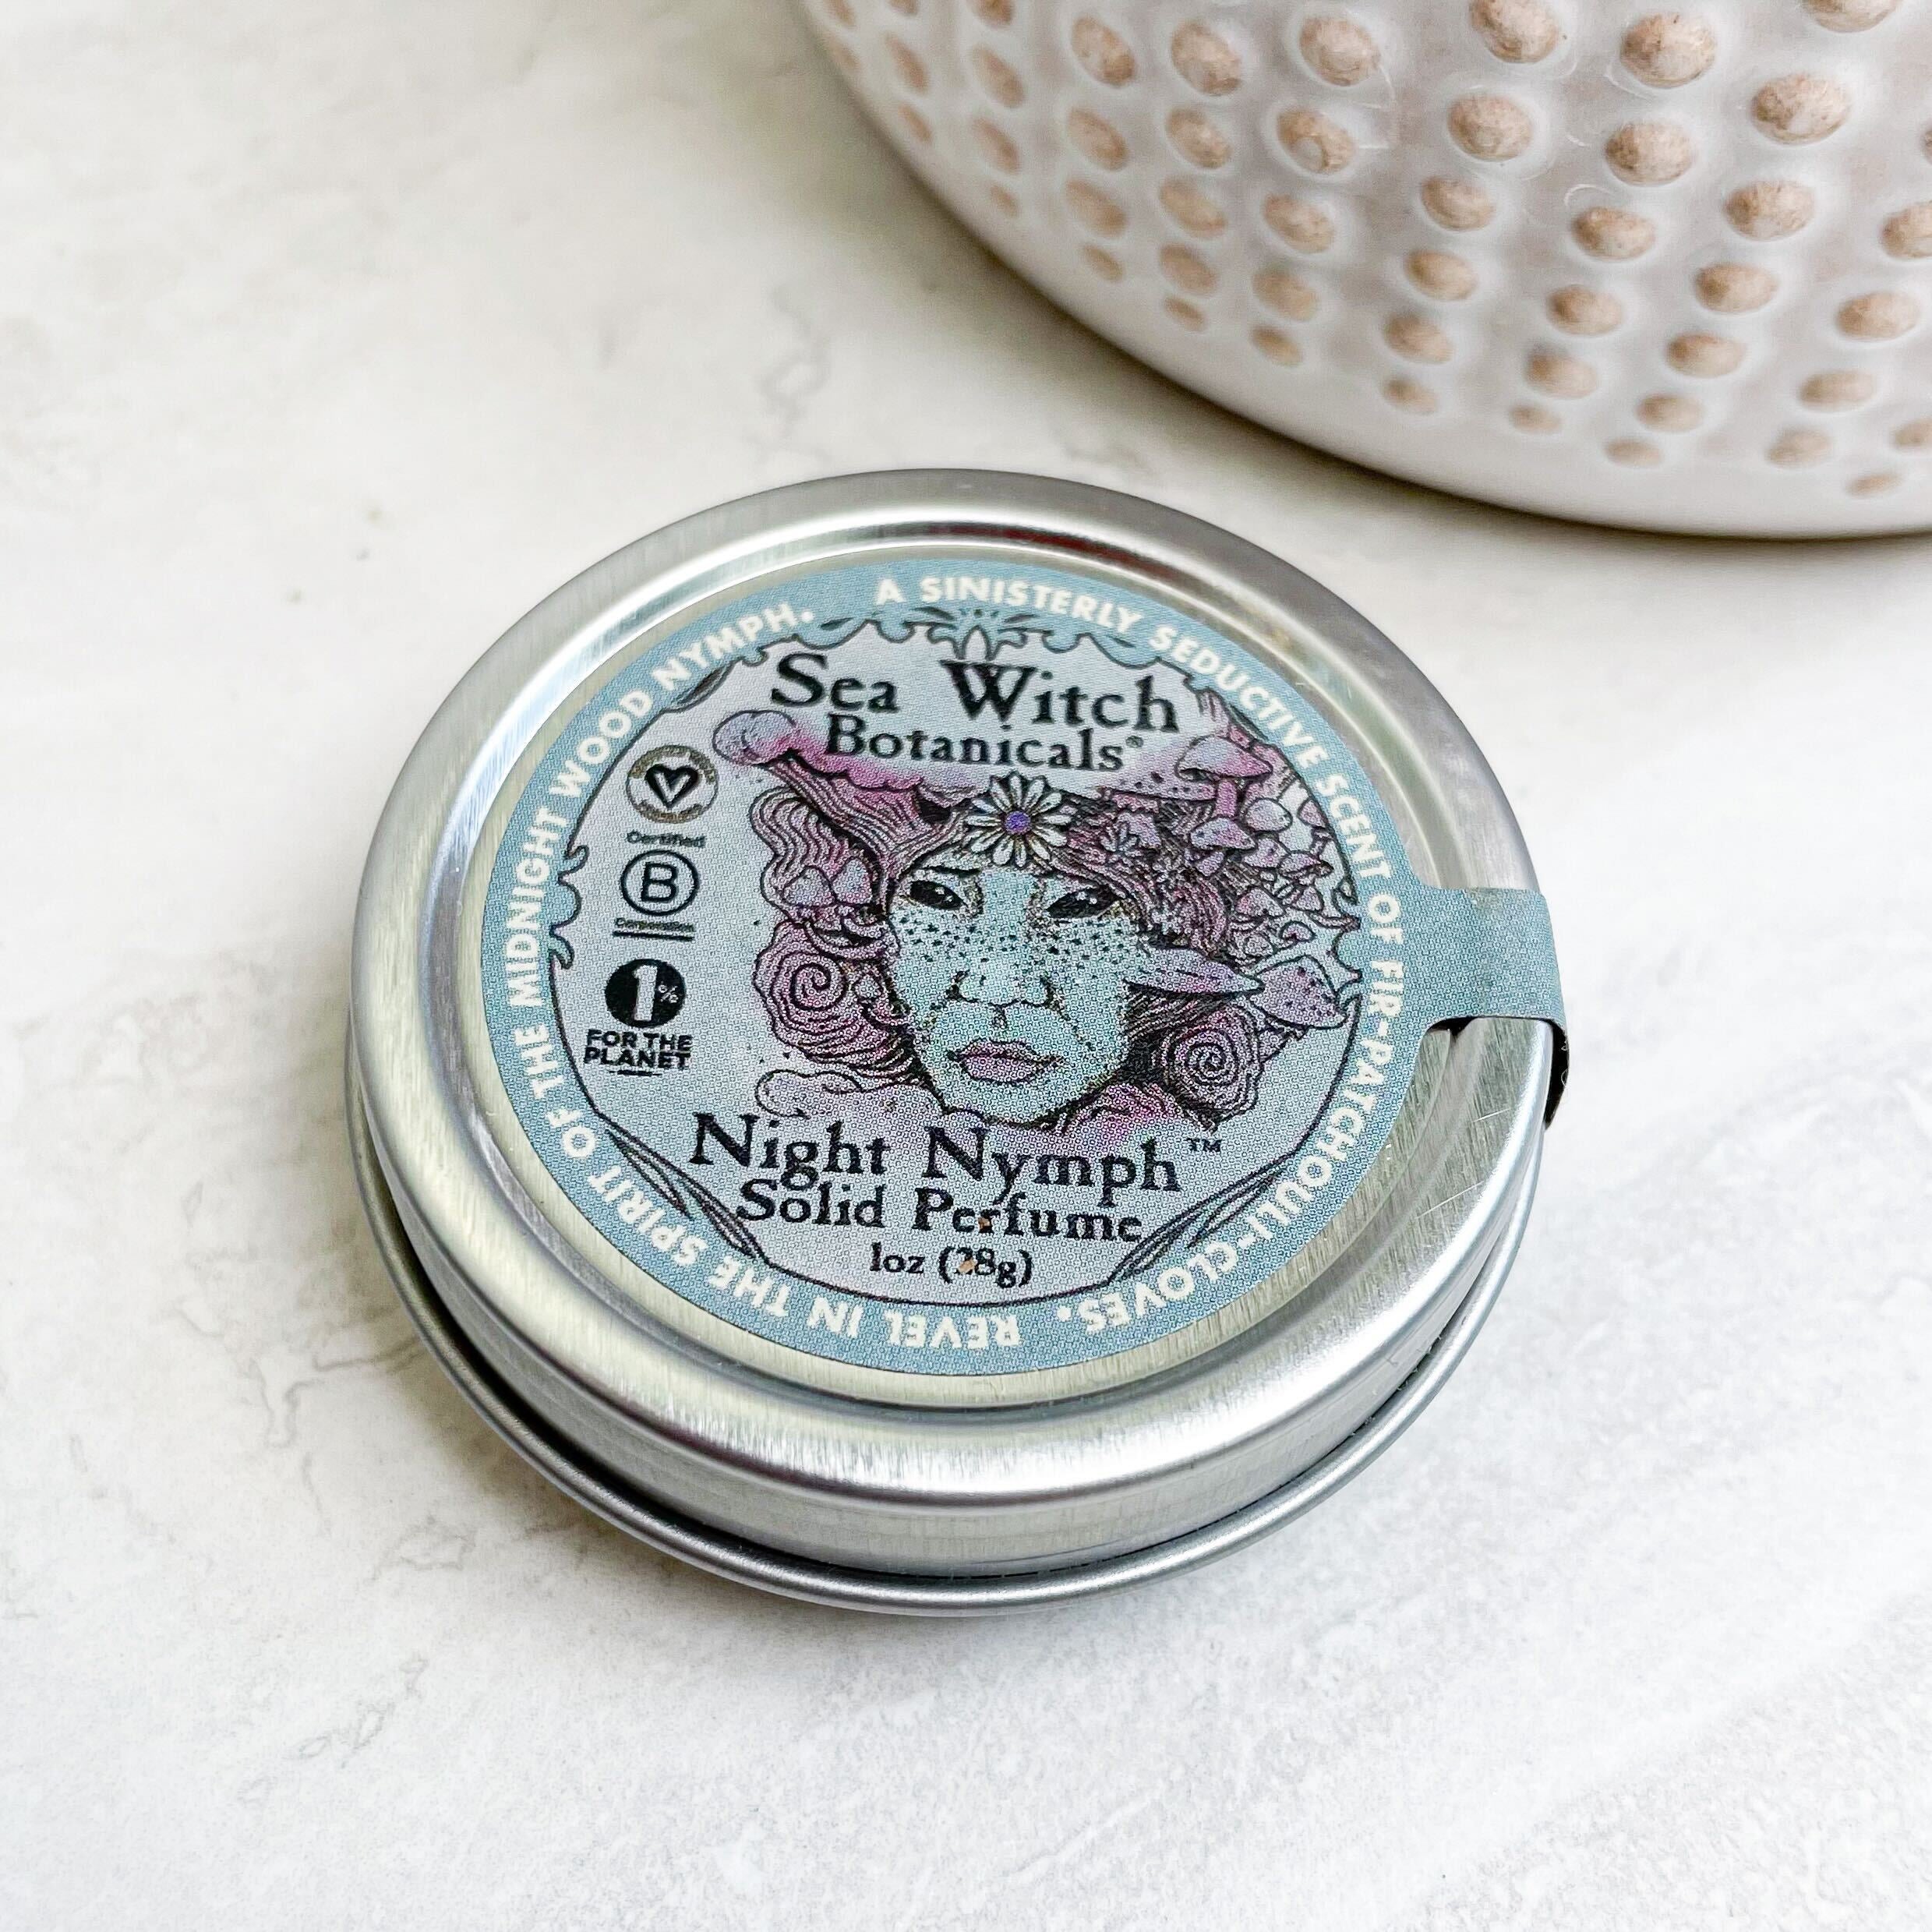 Sea Witch Botanicals Solid Perfume - Various Scents